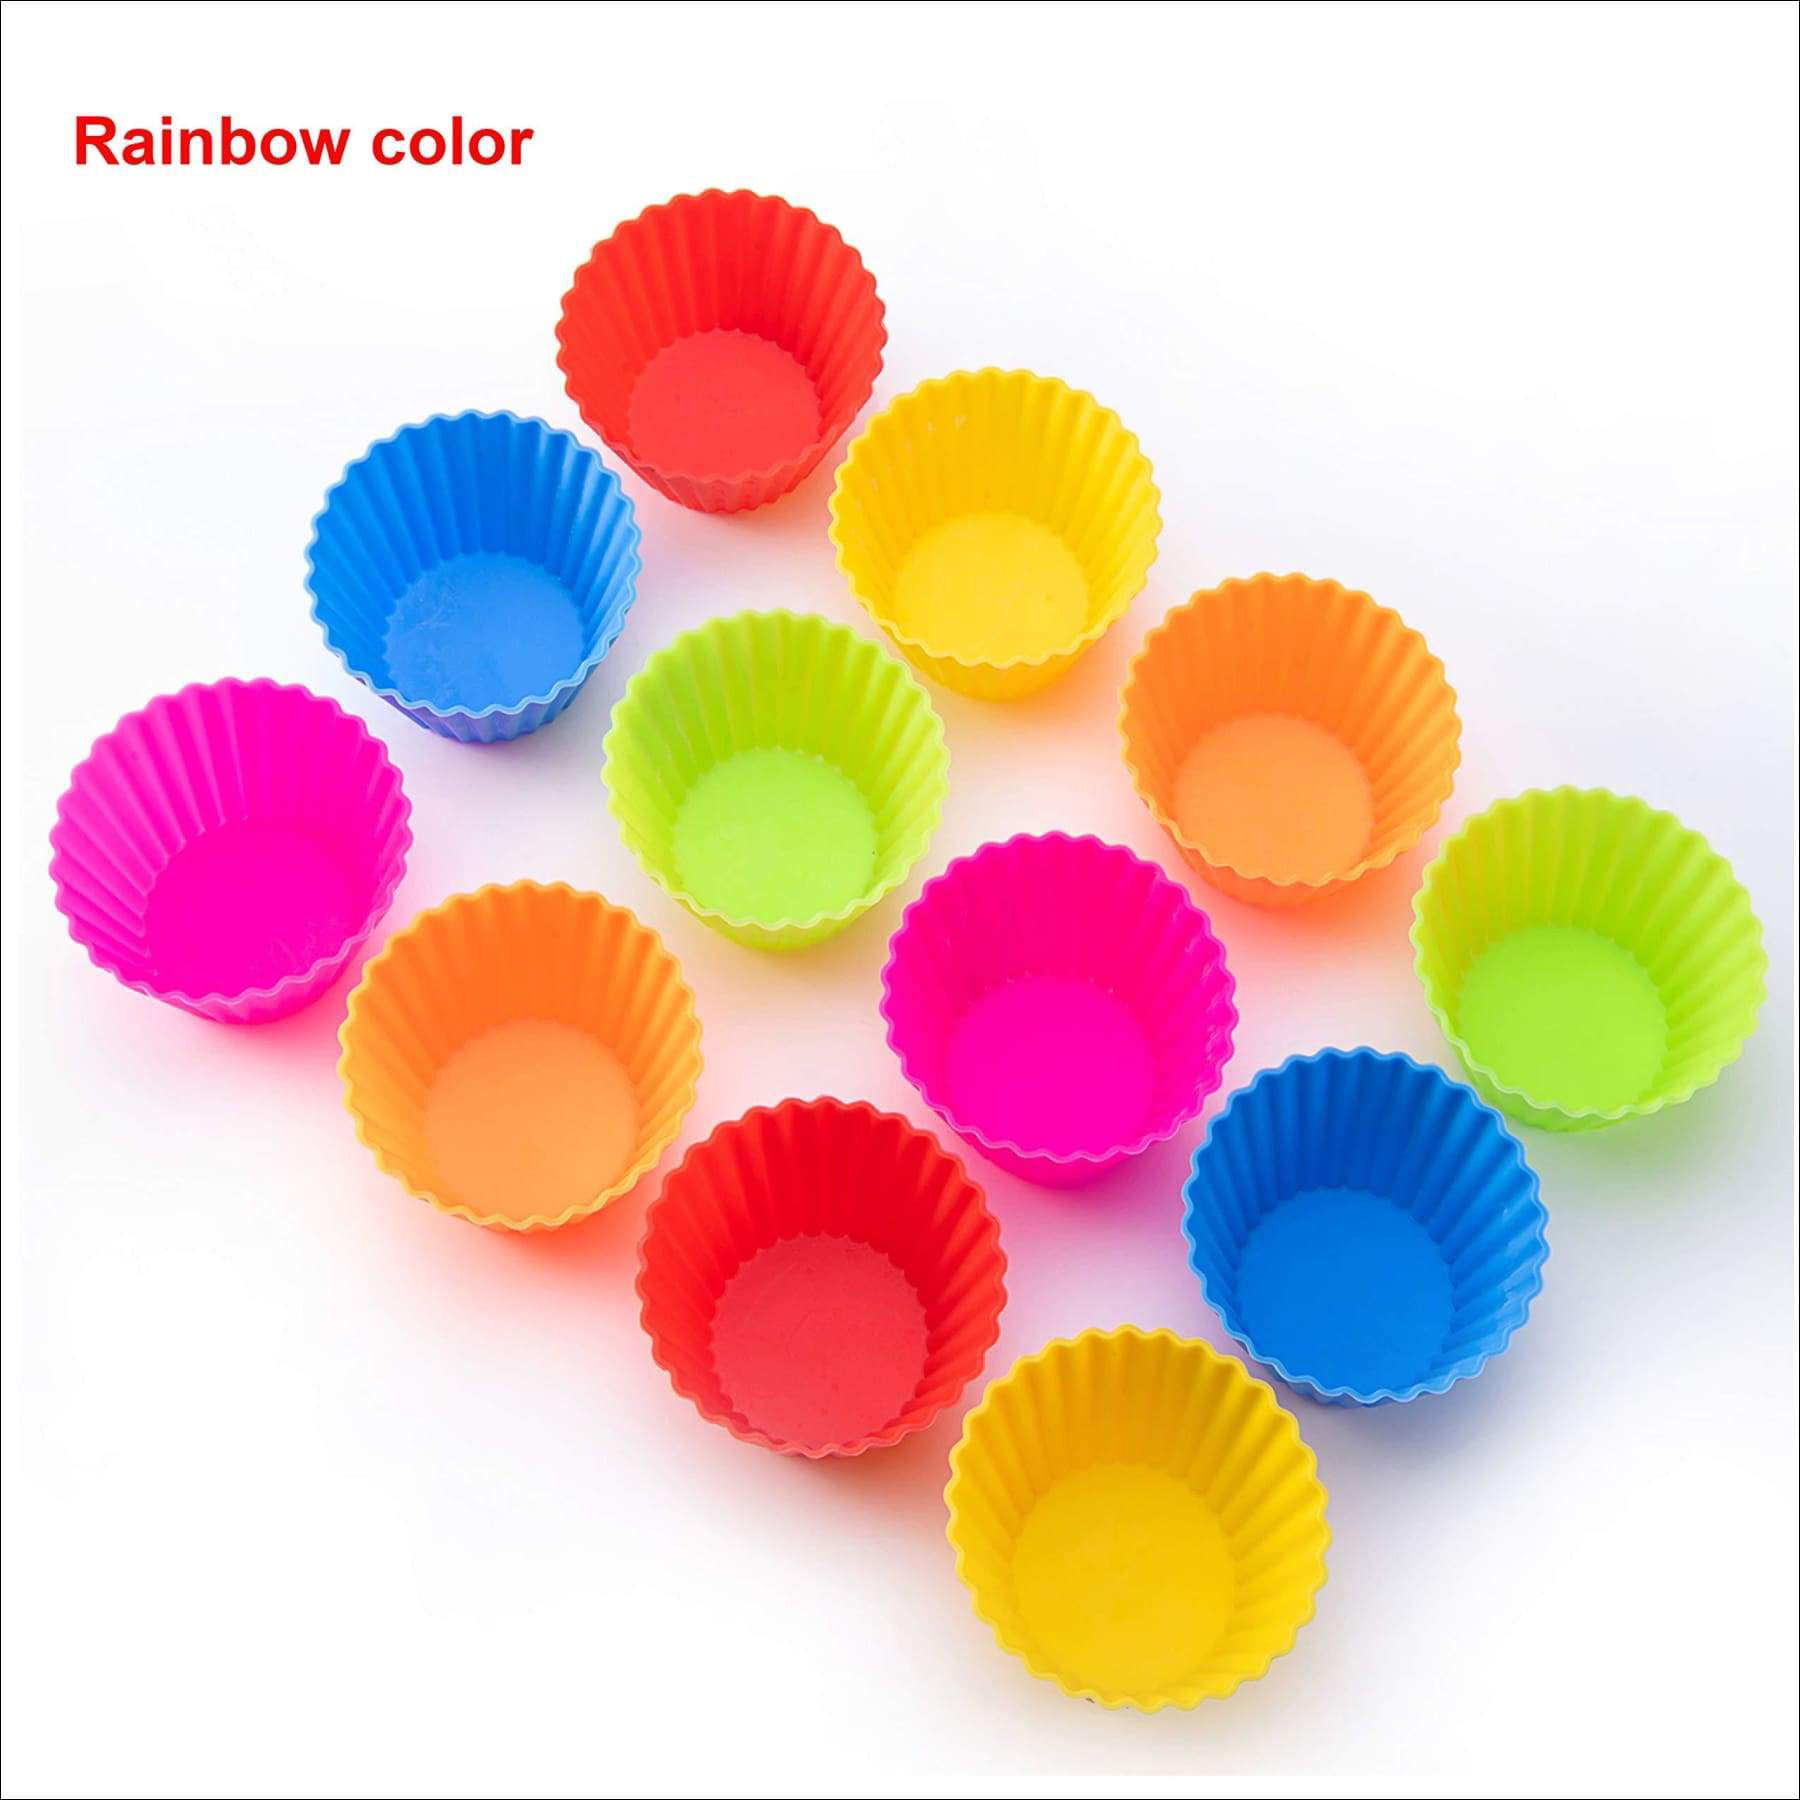 Silicone Baking Cups Set of 16 Standard Size 8 Rainbow Colors Non